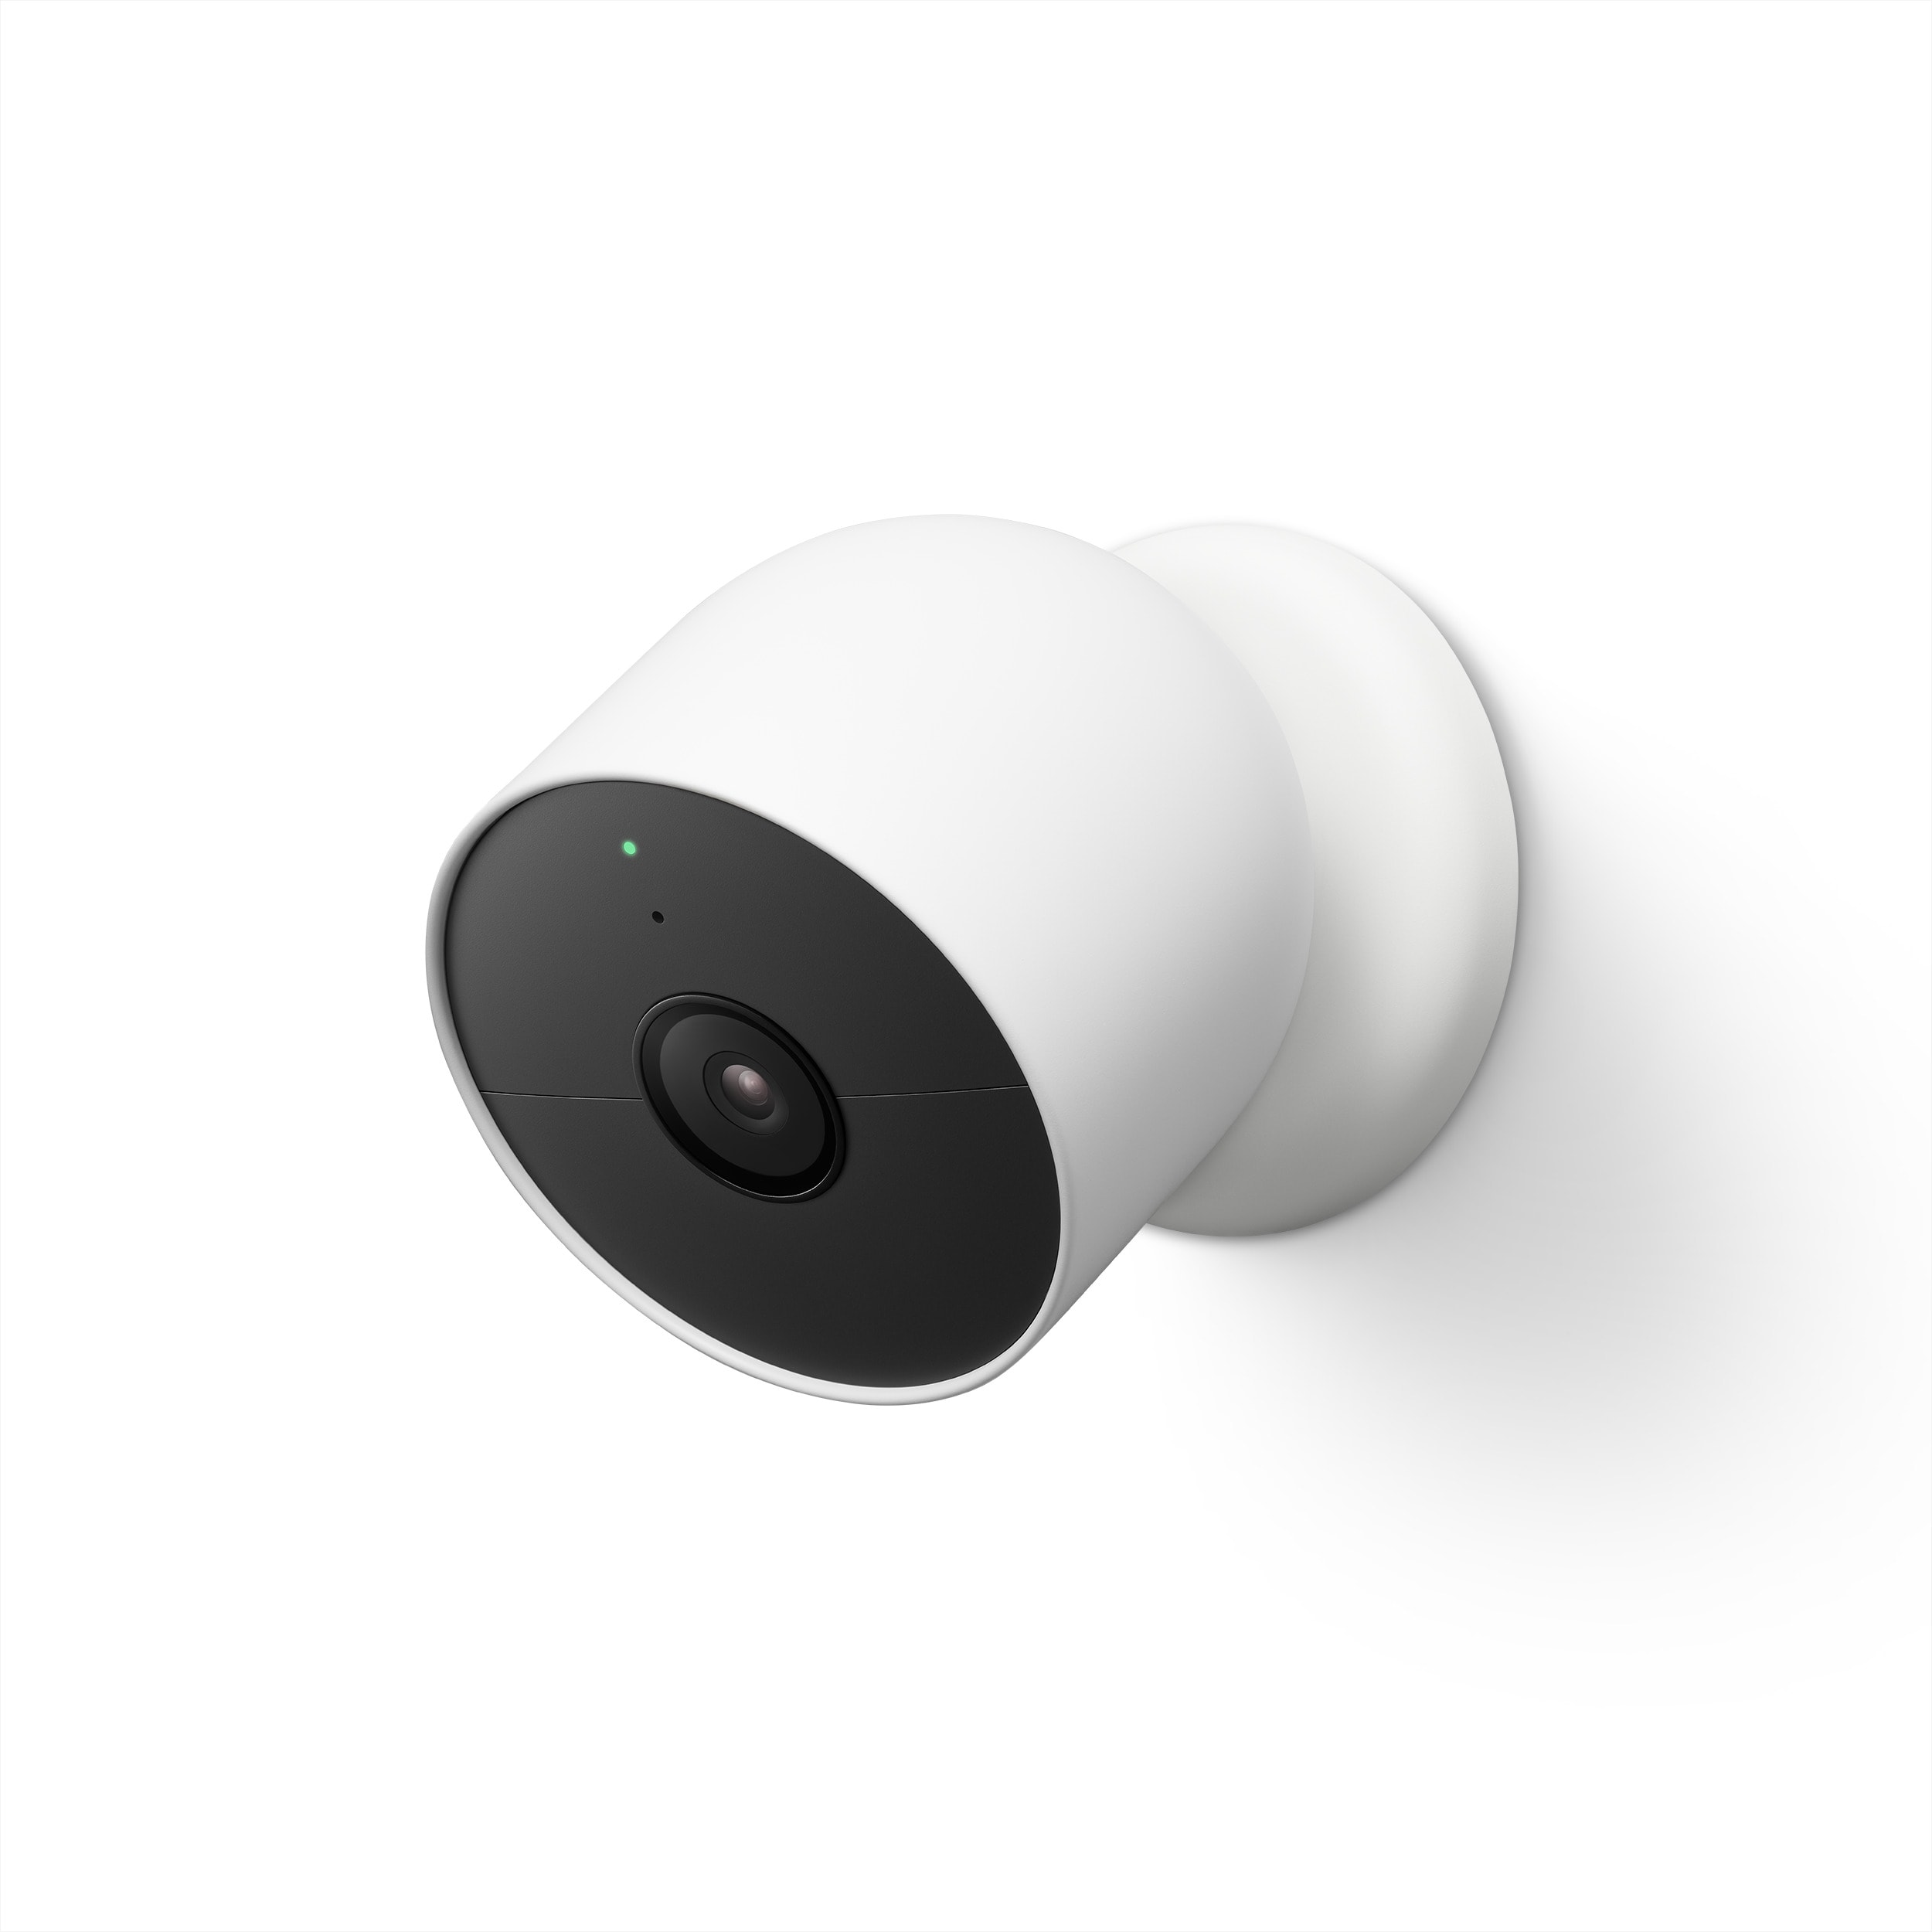 Google Nest Cam - Battery-Powered Wireless Indoor and Outdoor Smart Home  Security Camera